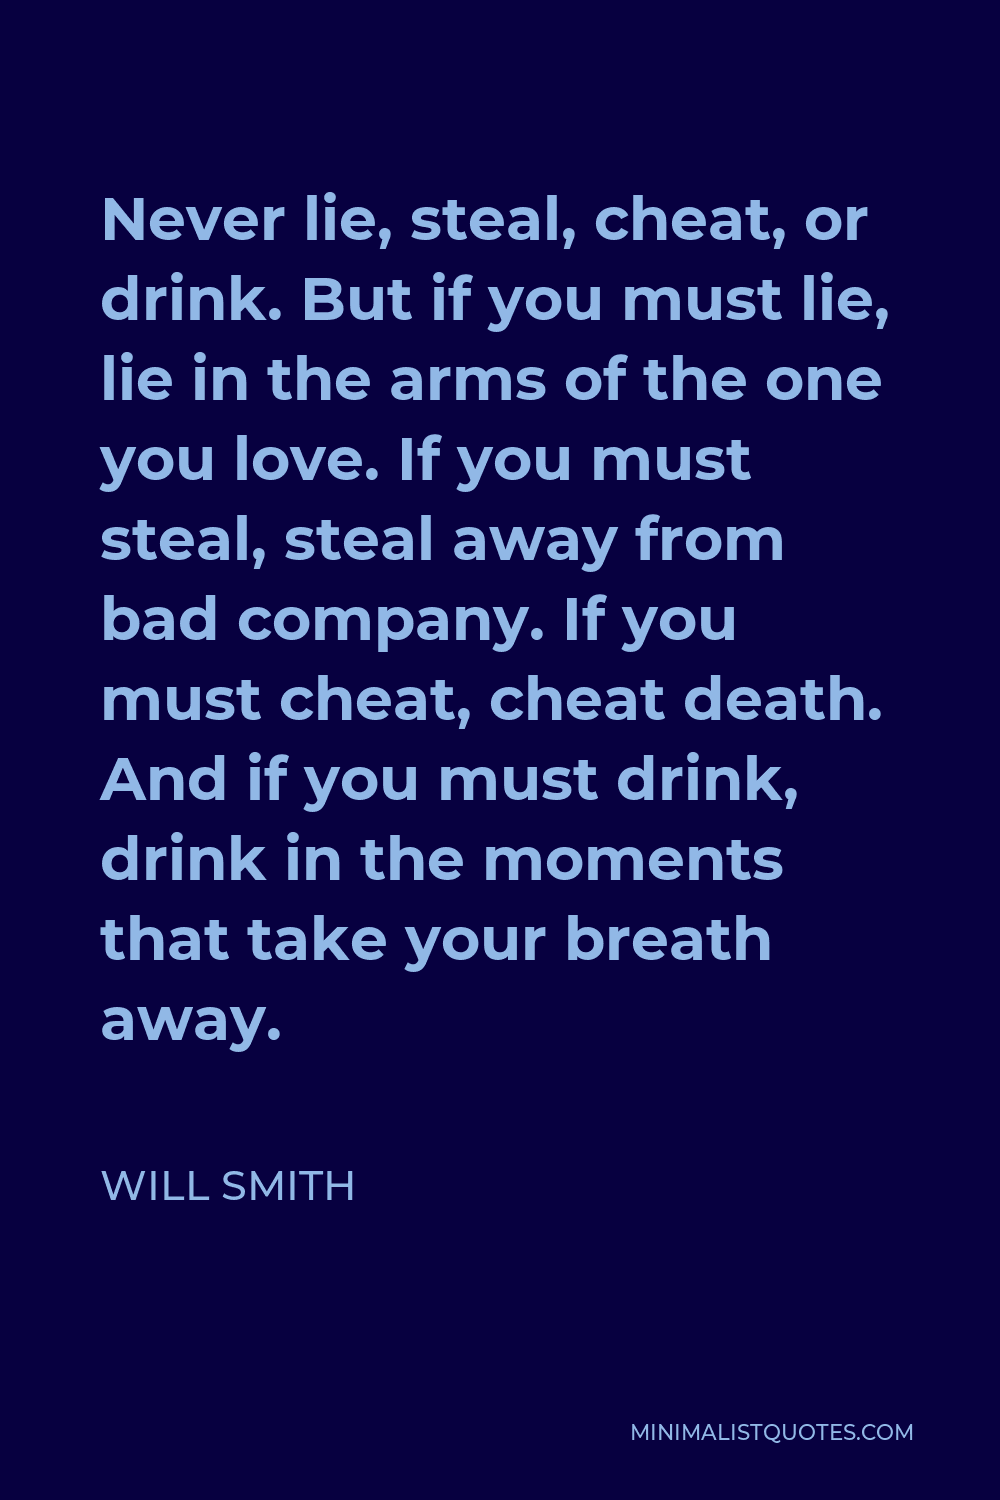 Will Smith Quote - Never lie, steal, cheat, or drink. But if you must lie, lie in the arms of the one you love. If you must steal, steal away from bad company. If you must cheat, cheat death. And if you must drink, drink in the moments that take your breath away.